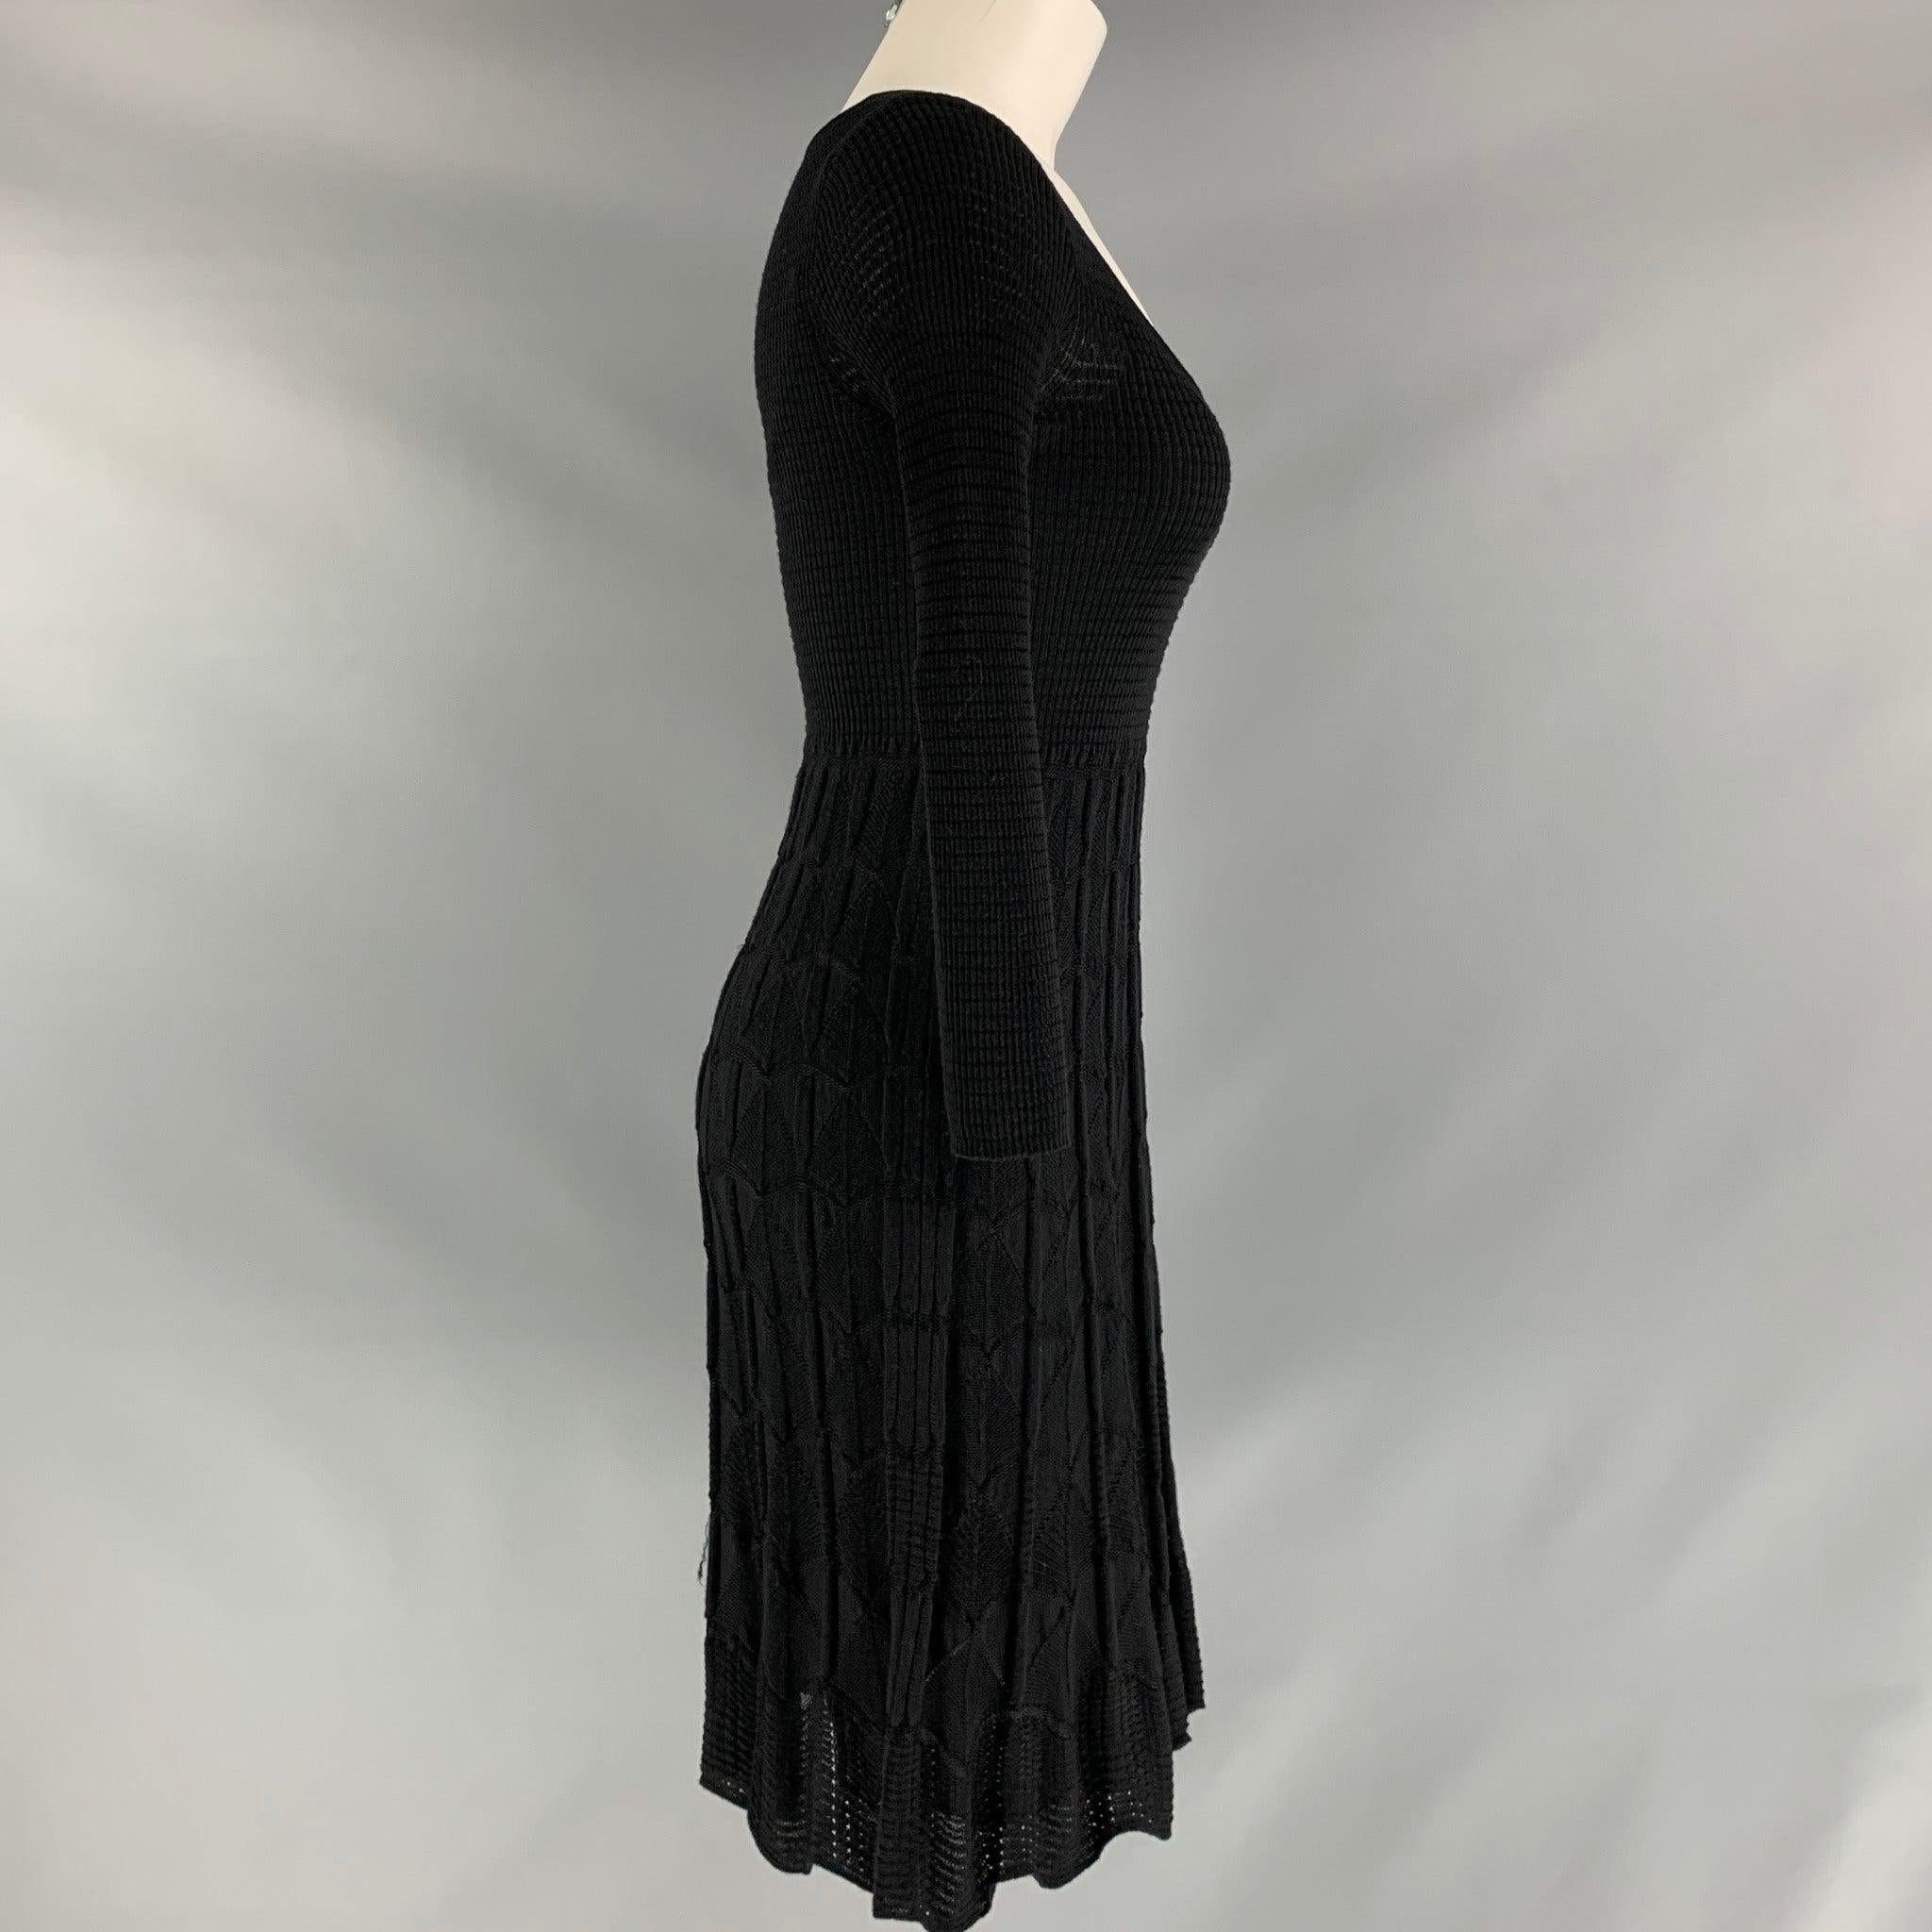 M MISSONI 3/4 sleeve A-line dress comes in black knitted fabric and removable slip lining.
 Made in Italy.Very Good Pre-Owned Condition. Fabric Tag Removed. 

Marked:   42  

Measurements: 
 
Shoulder: 15 inBust: 26 inWaist: 25 inHip: 33 inSleeve: